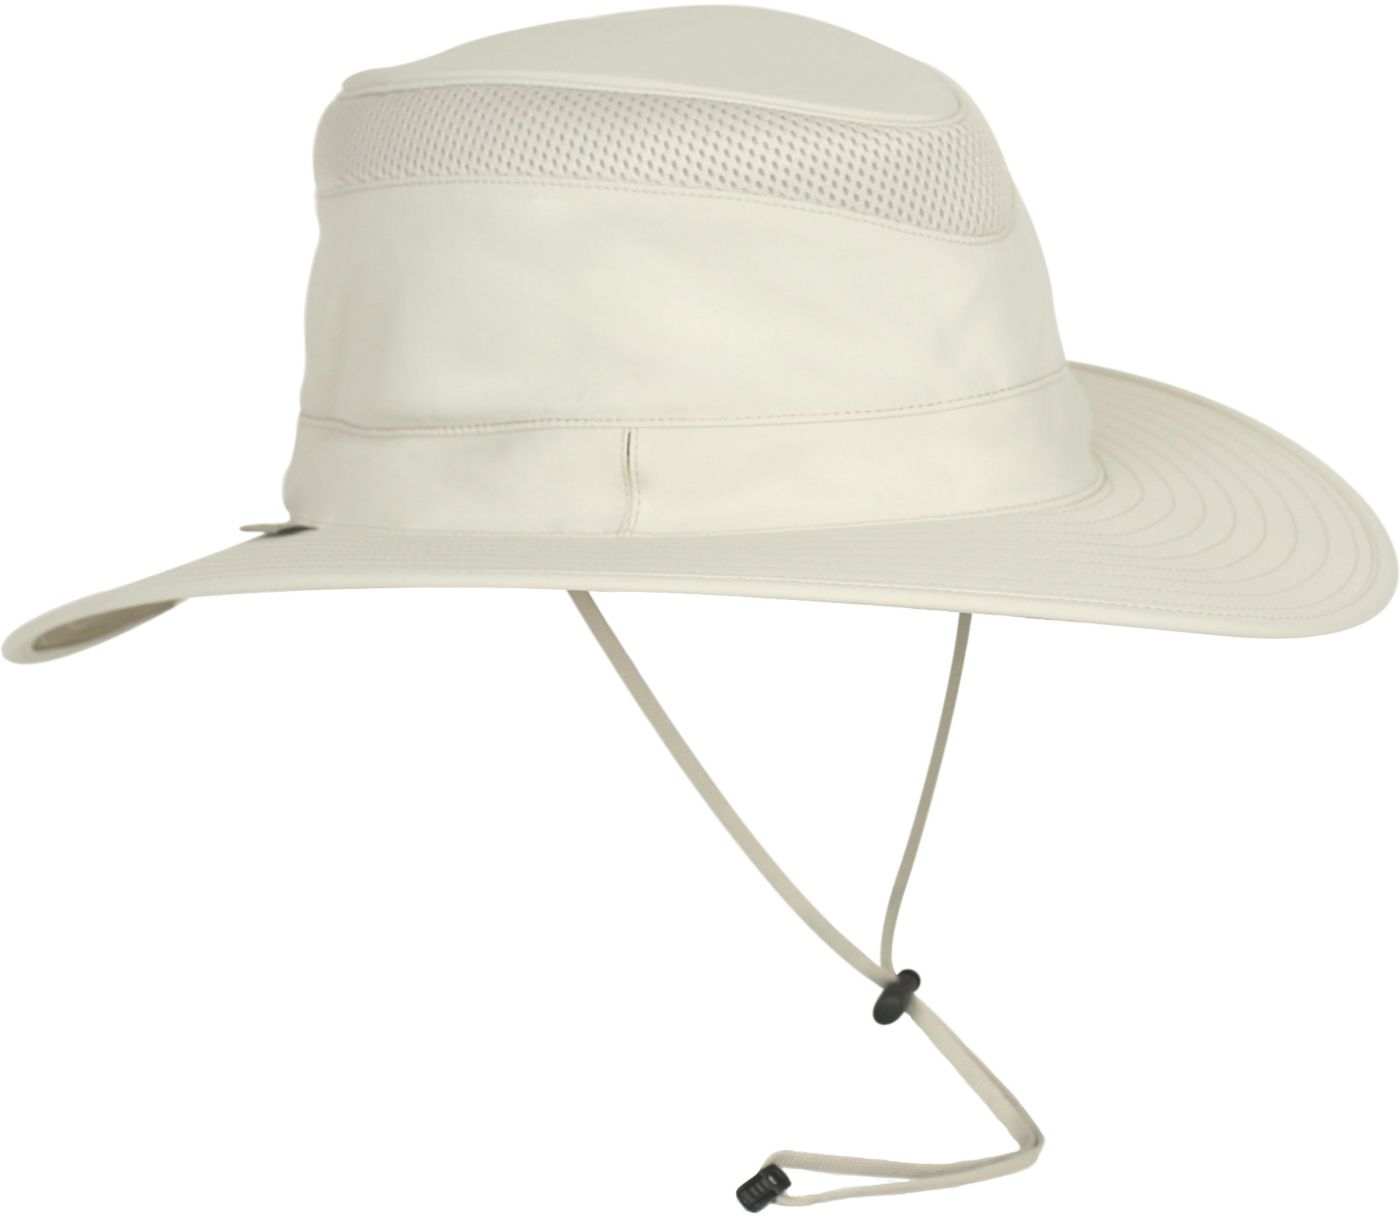 Sunday Afternoons Men's Charter Hat DICK'S Sporting Goods